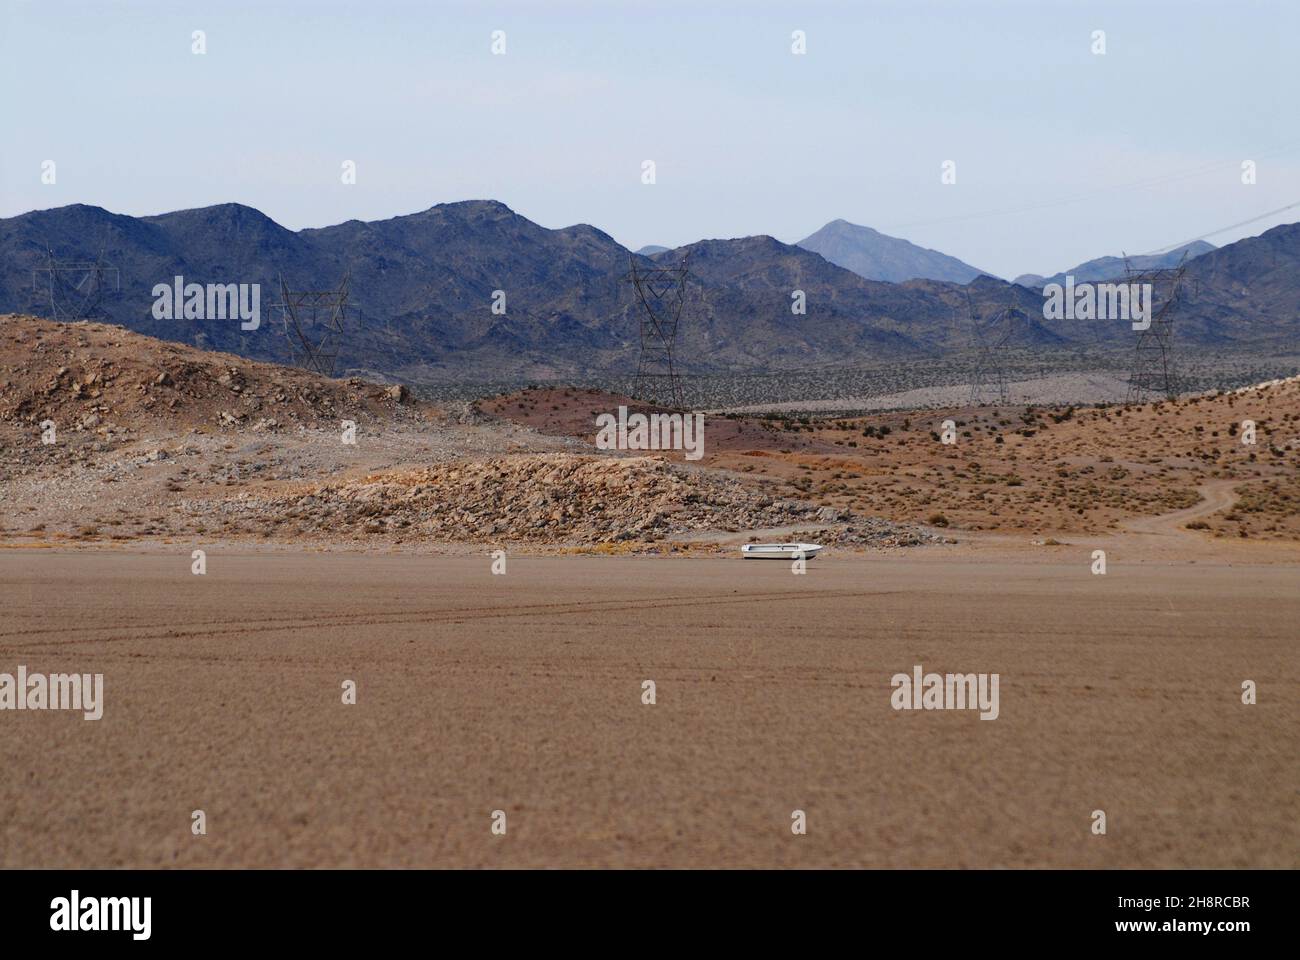 This Nevada desert landscape shows the effects of climate change, featuring a dried up lake complete with a stranded boat. Stock Photo